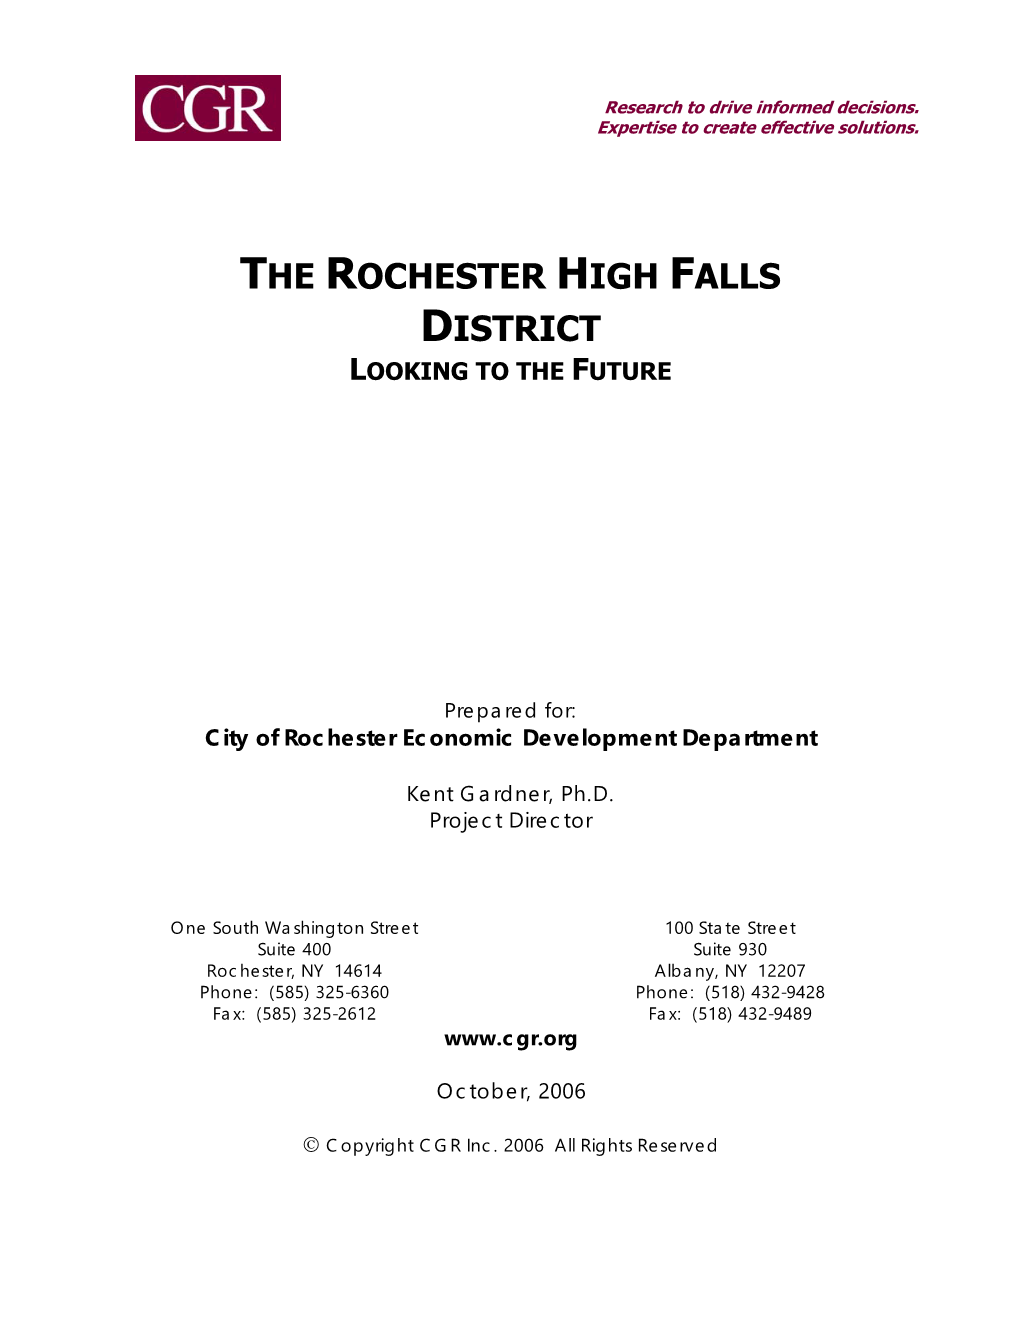 The Rochester High Falls District Looking to the Future